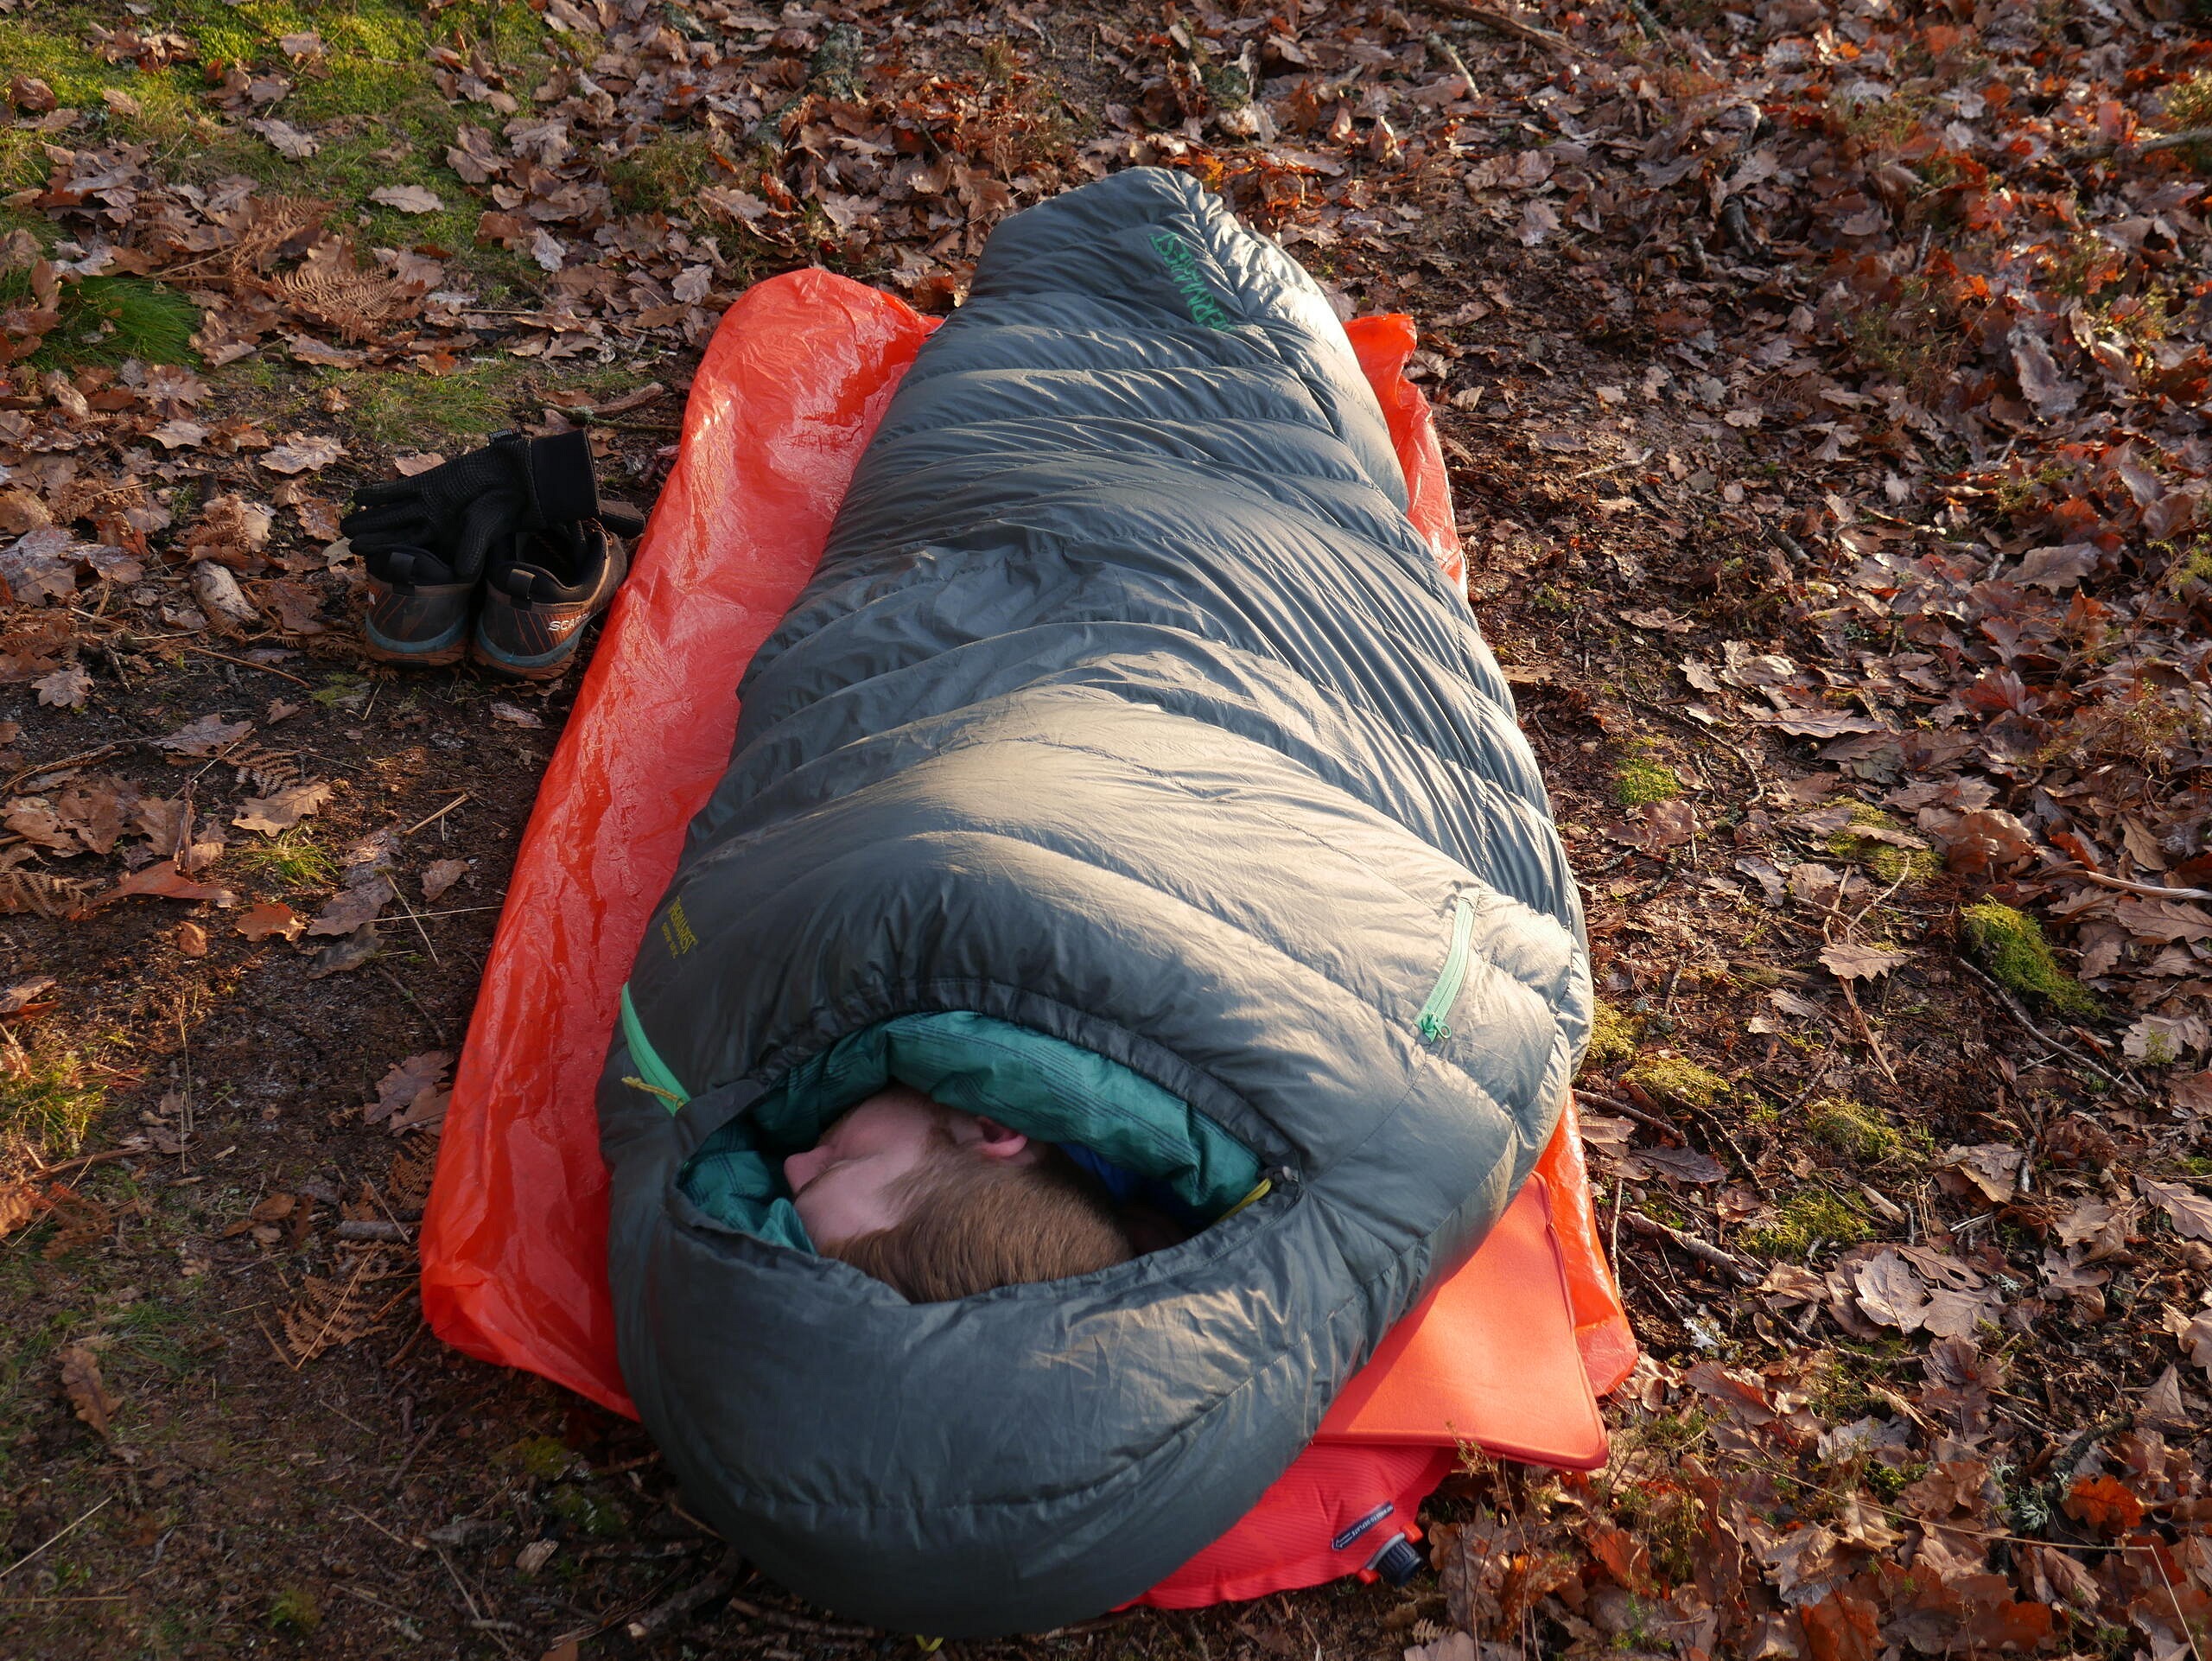 The wide construction gives enough space for side sleepers  © UKC Gear